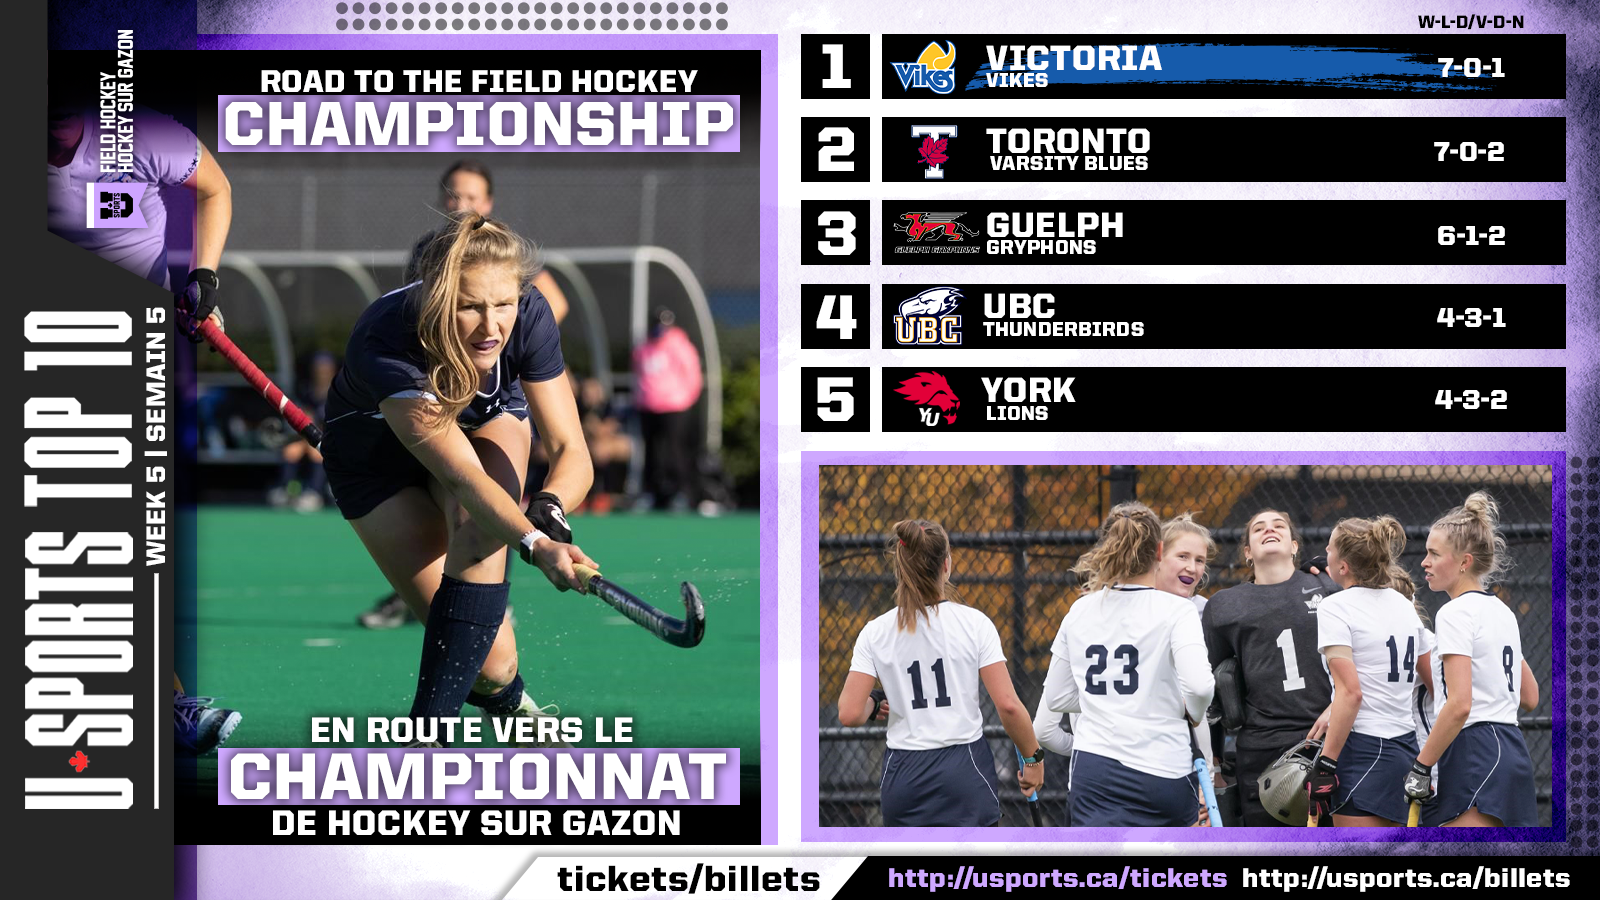 TOP_10_FHOCKEY_WK5.1.png (1.42 MB)